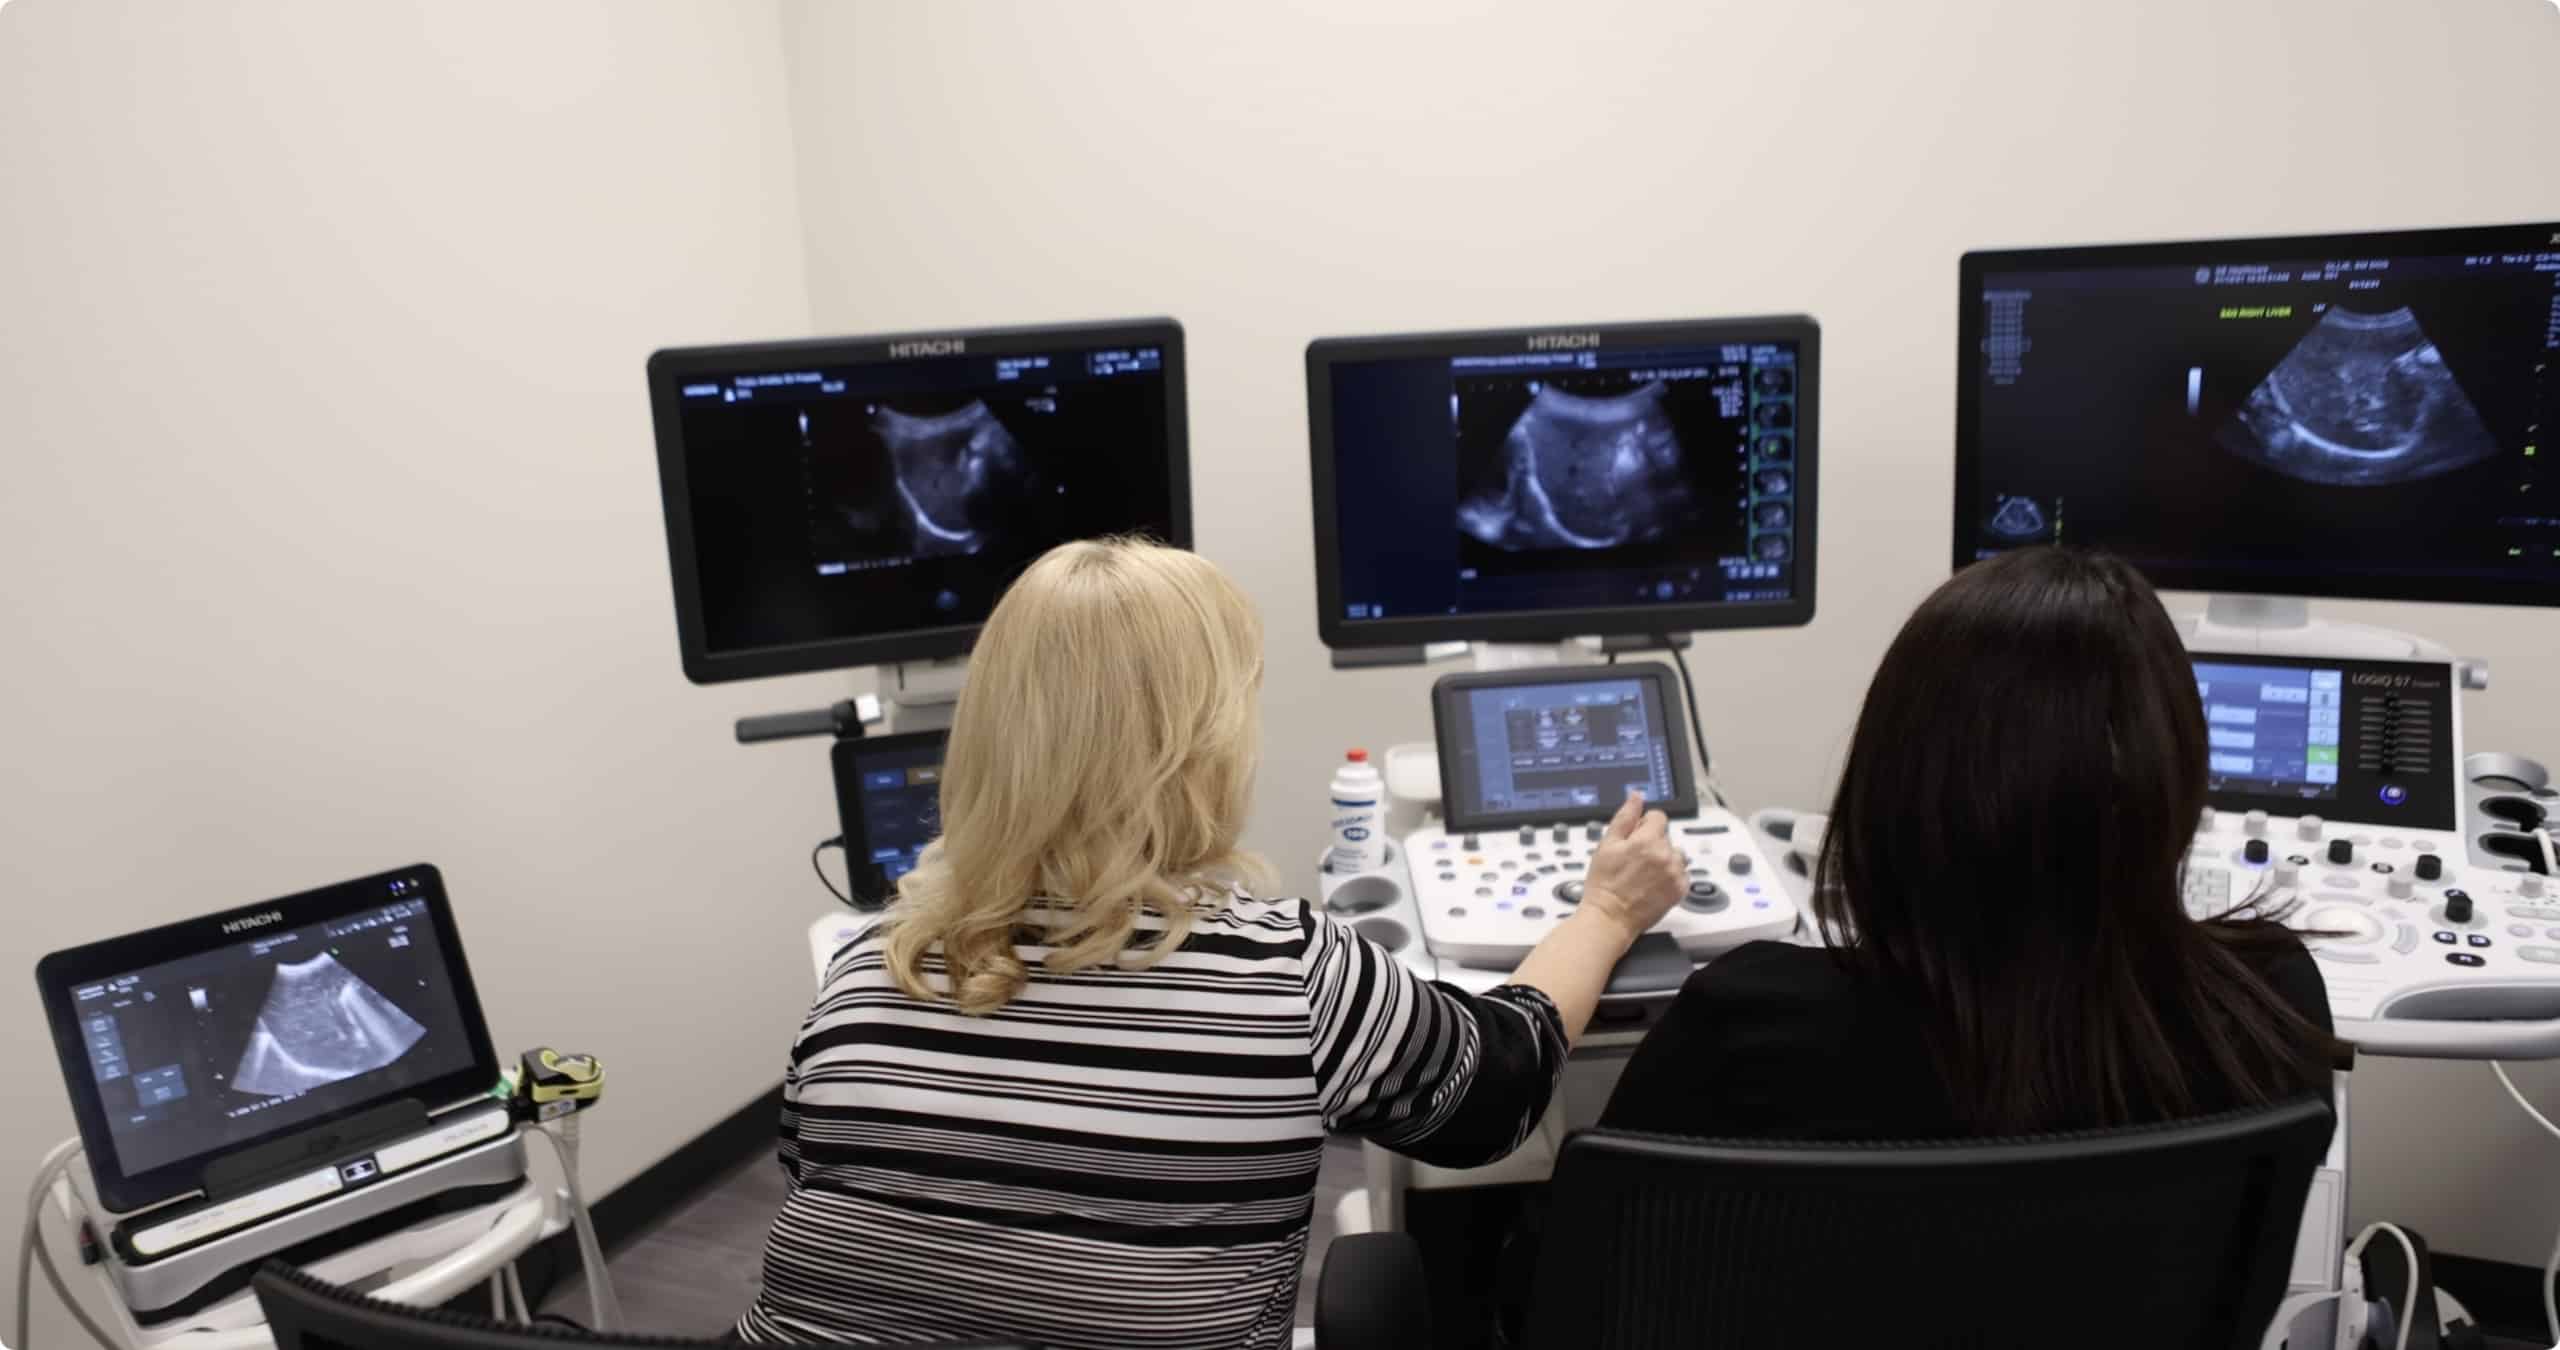 Ultrasound System comparisons by Probo Medical sonographers